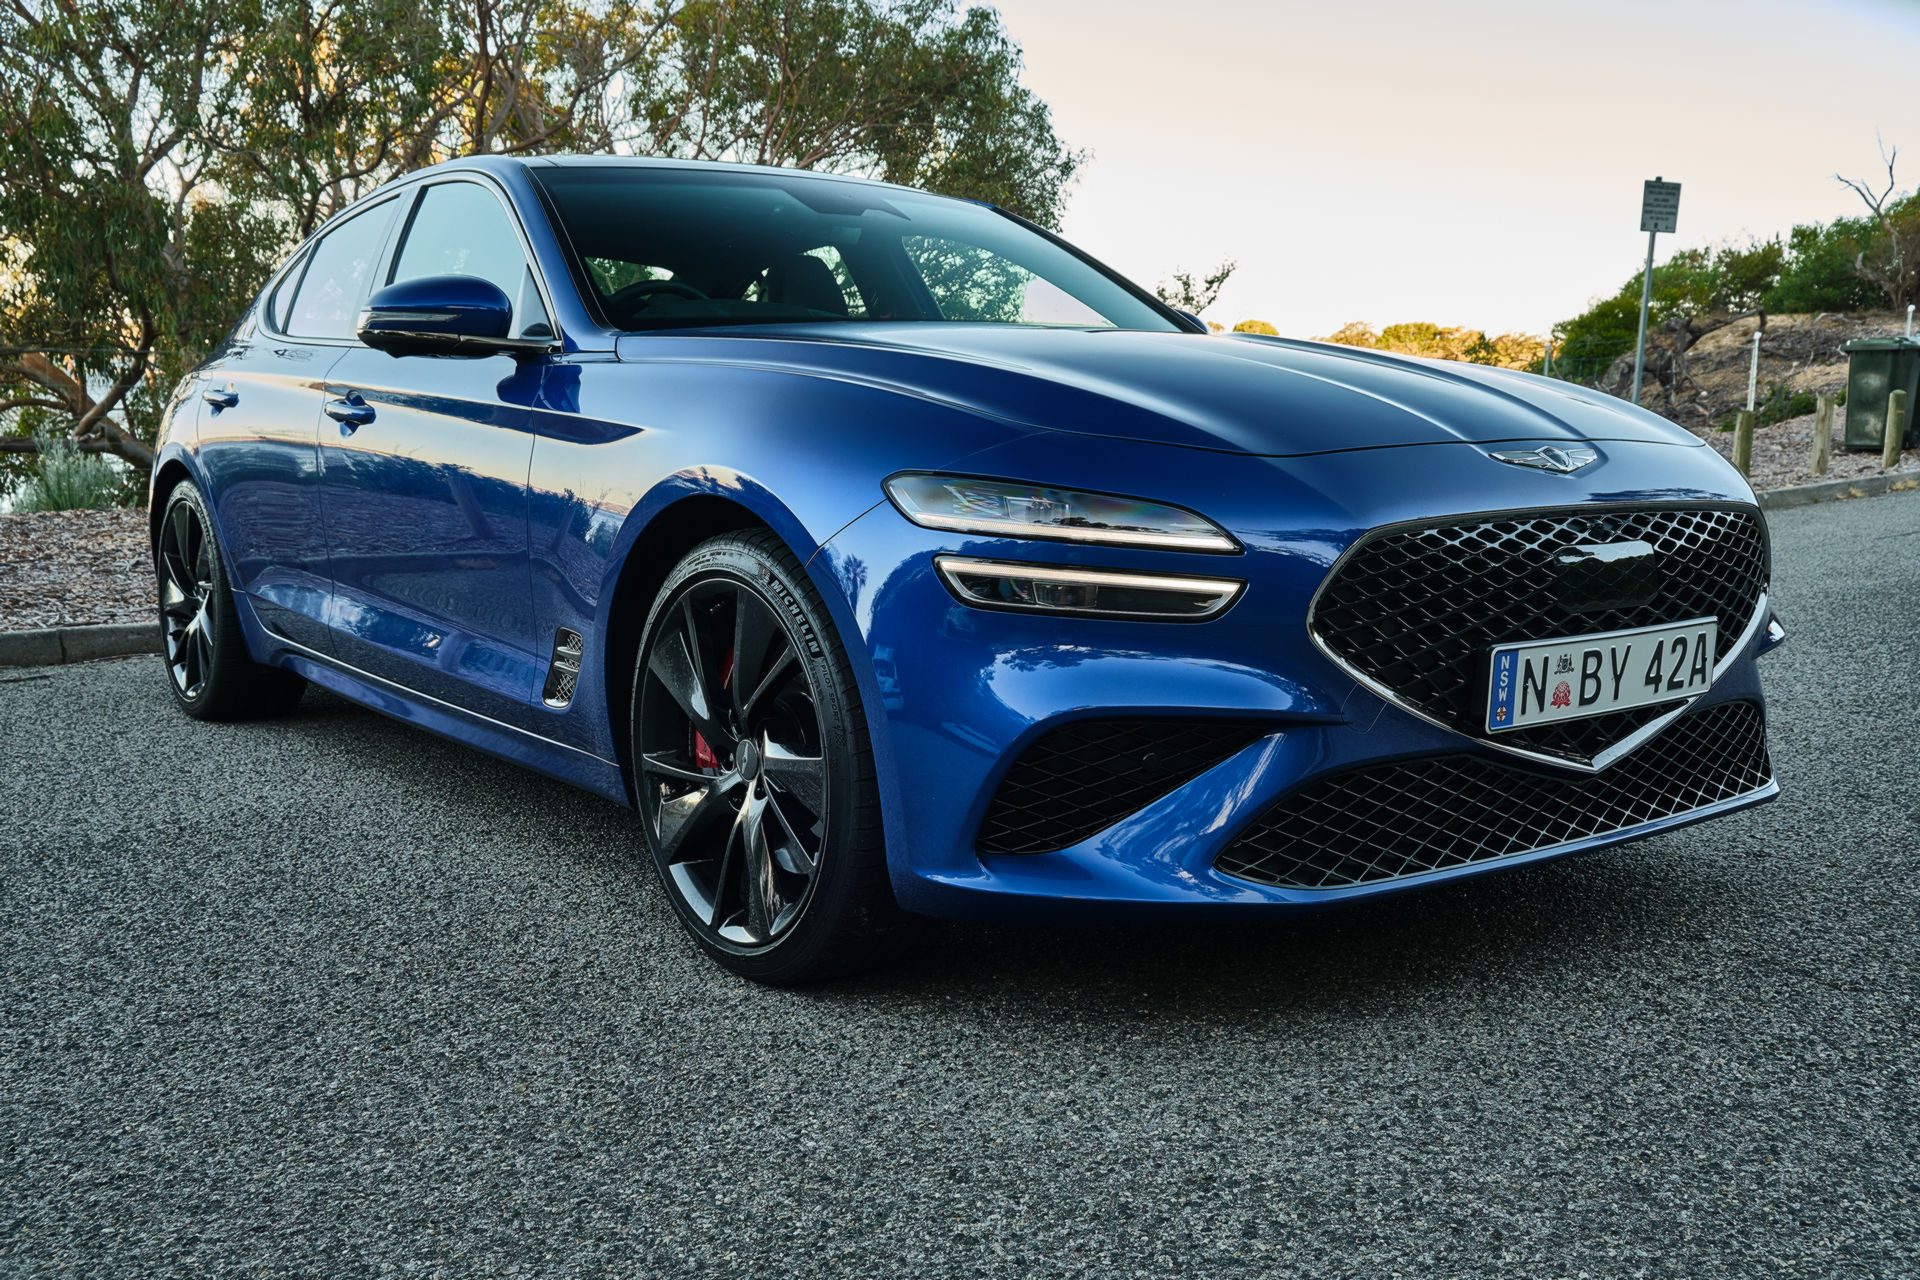 Driven: 2022 Genesis G70 Remains A Great Sports Sedan For The Money ...